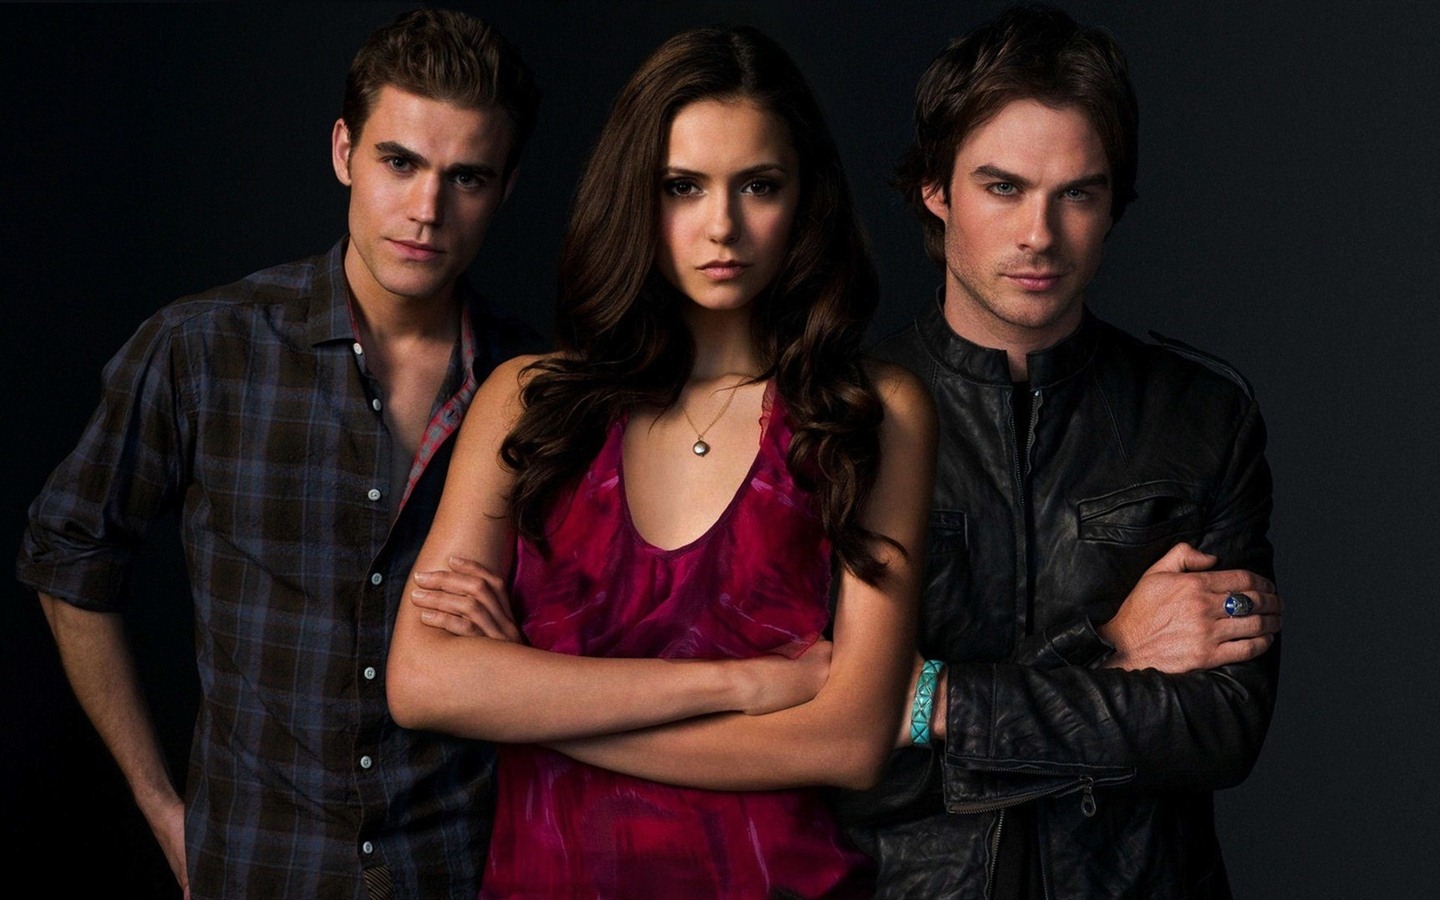 The Vampire Diaries HD Wallpapers #10 - 1440x900